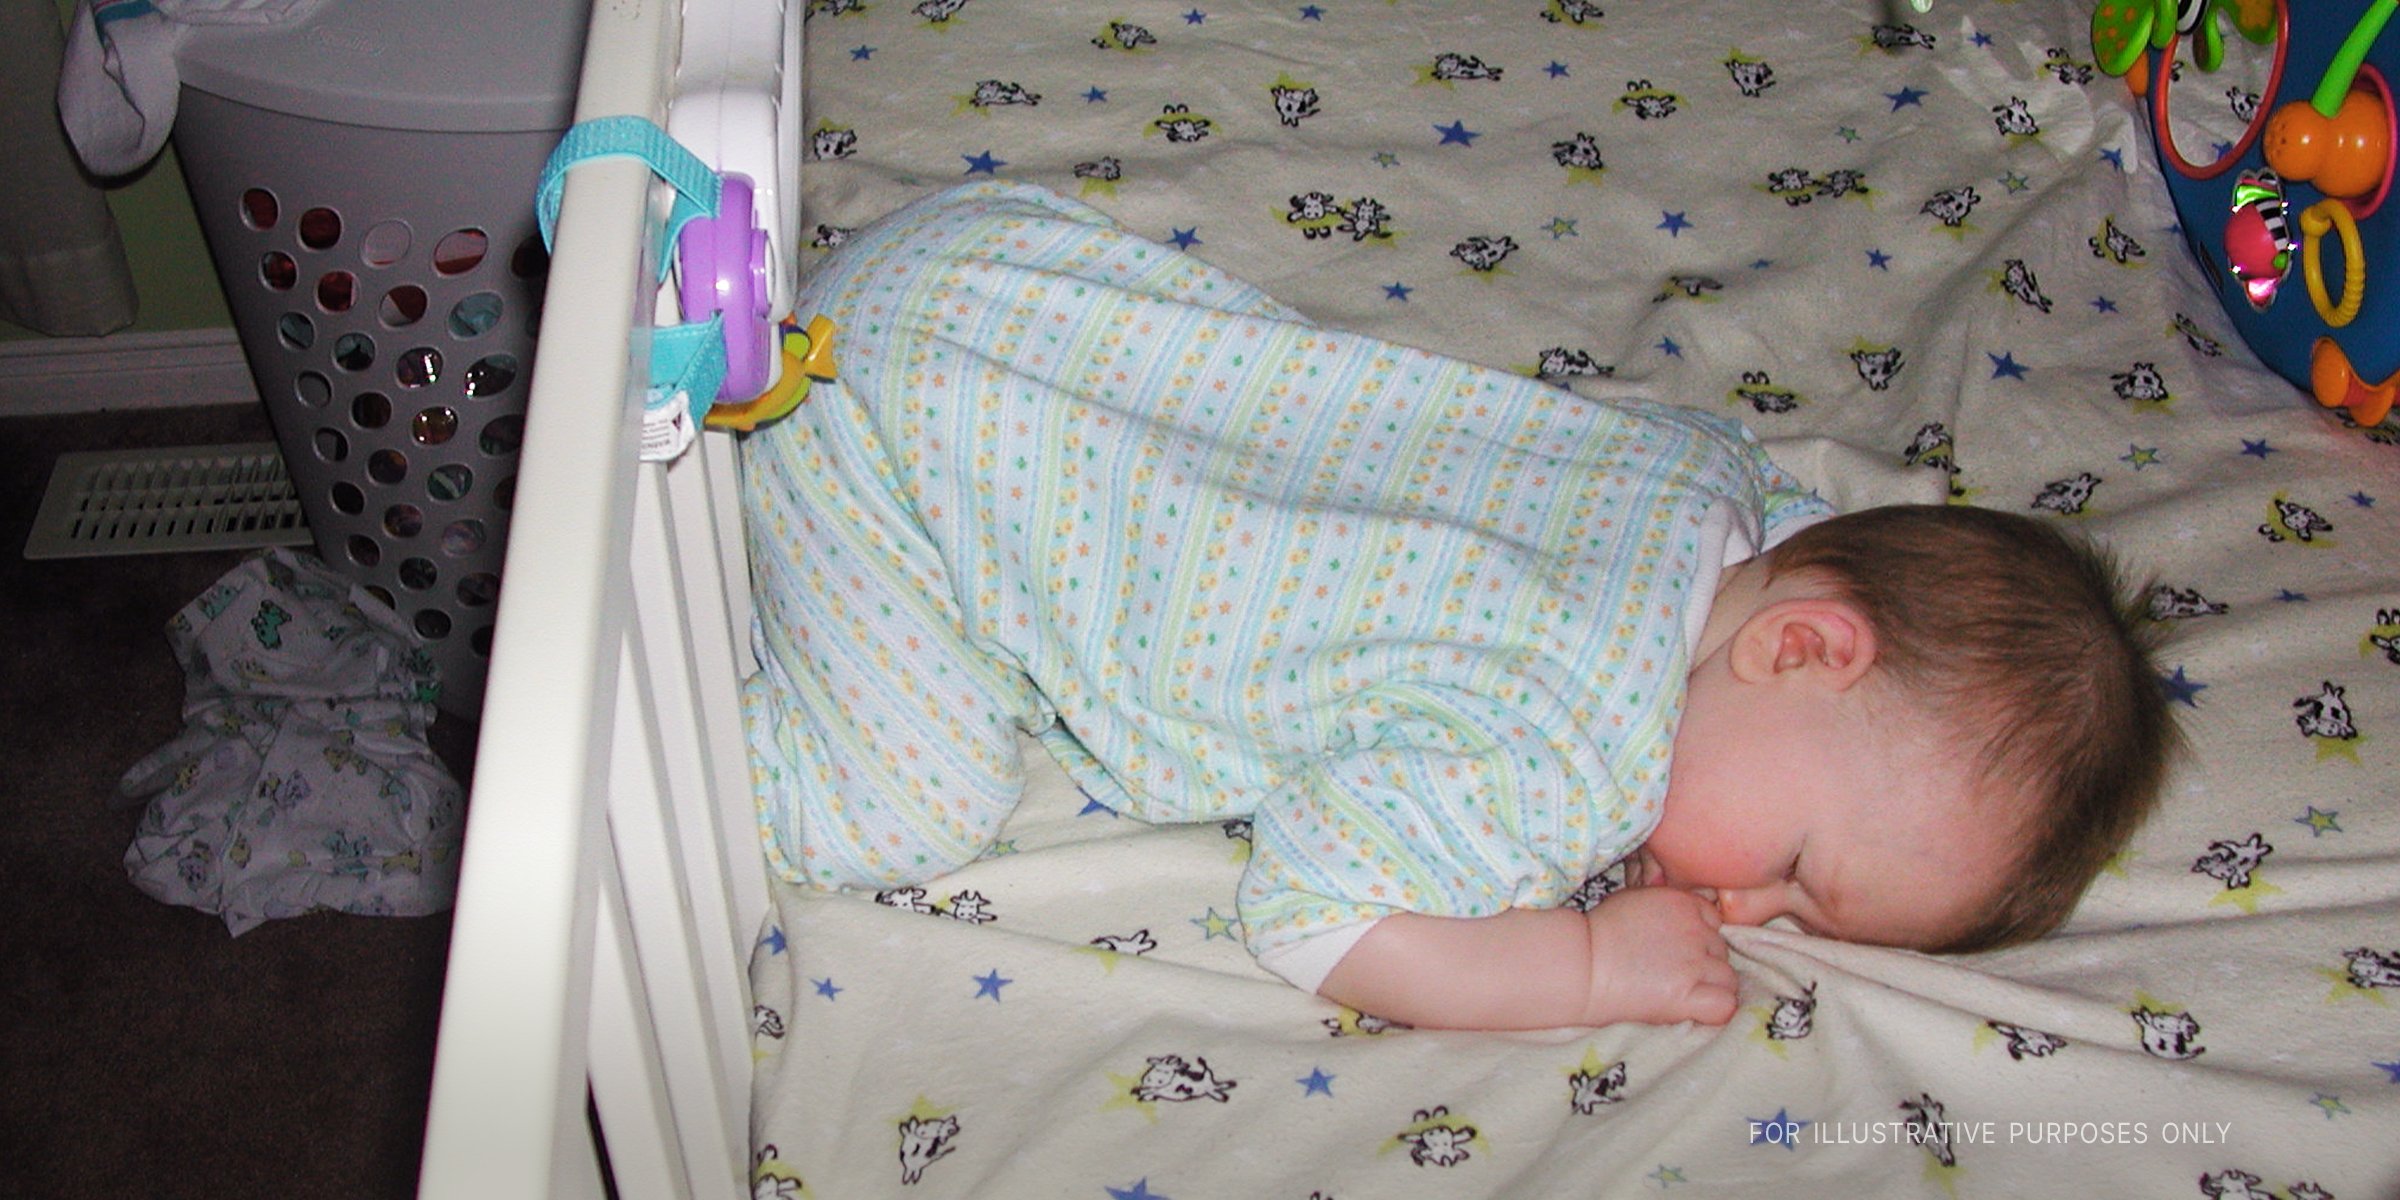 A baby sleeping on a bed | Source: Flickr / DNAMichaud  (CC BY 2.0)